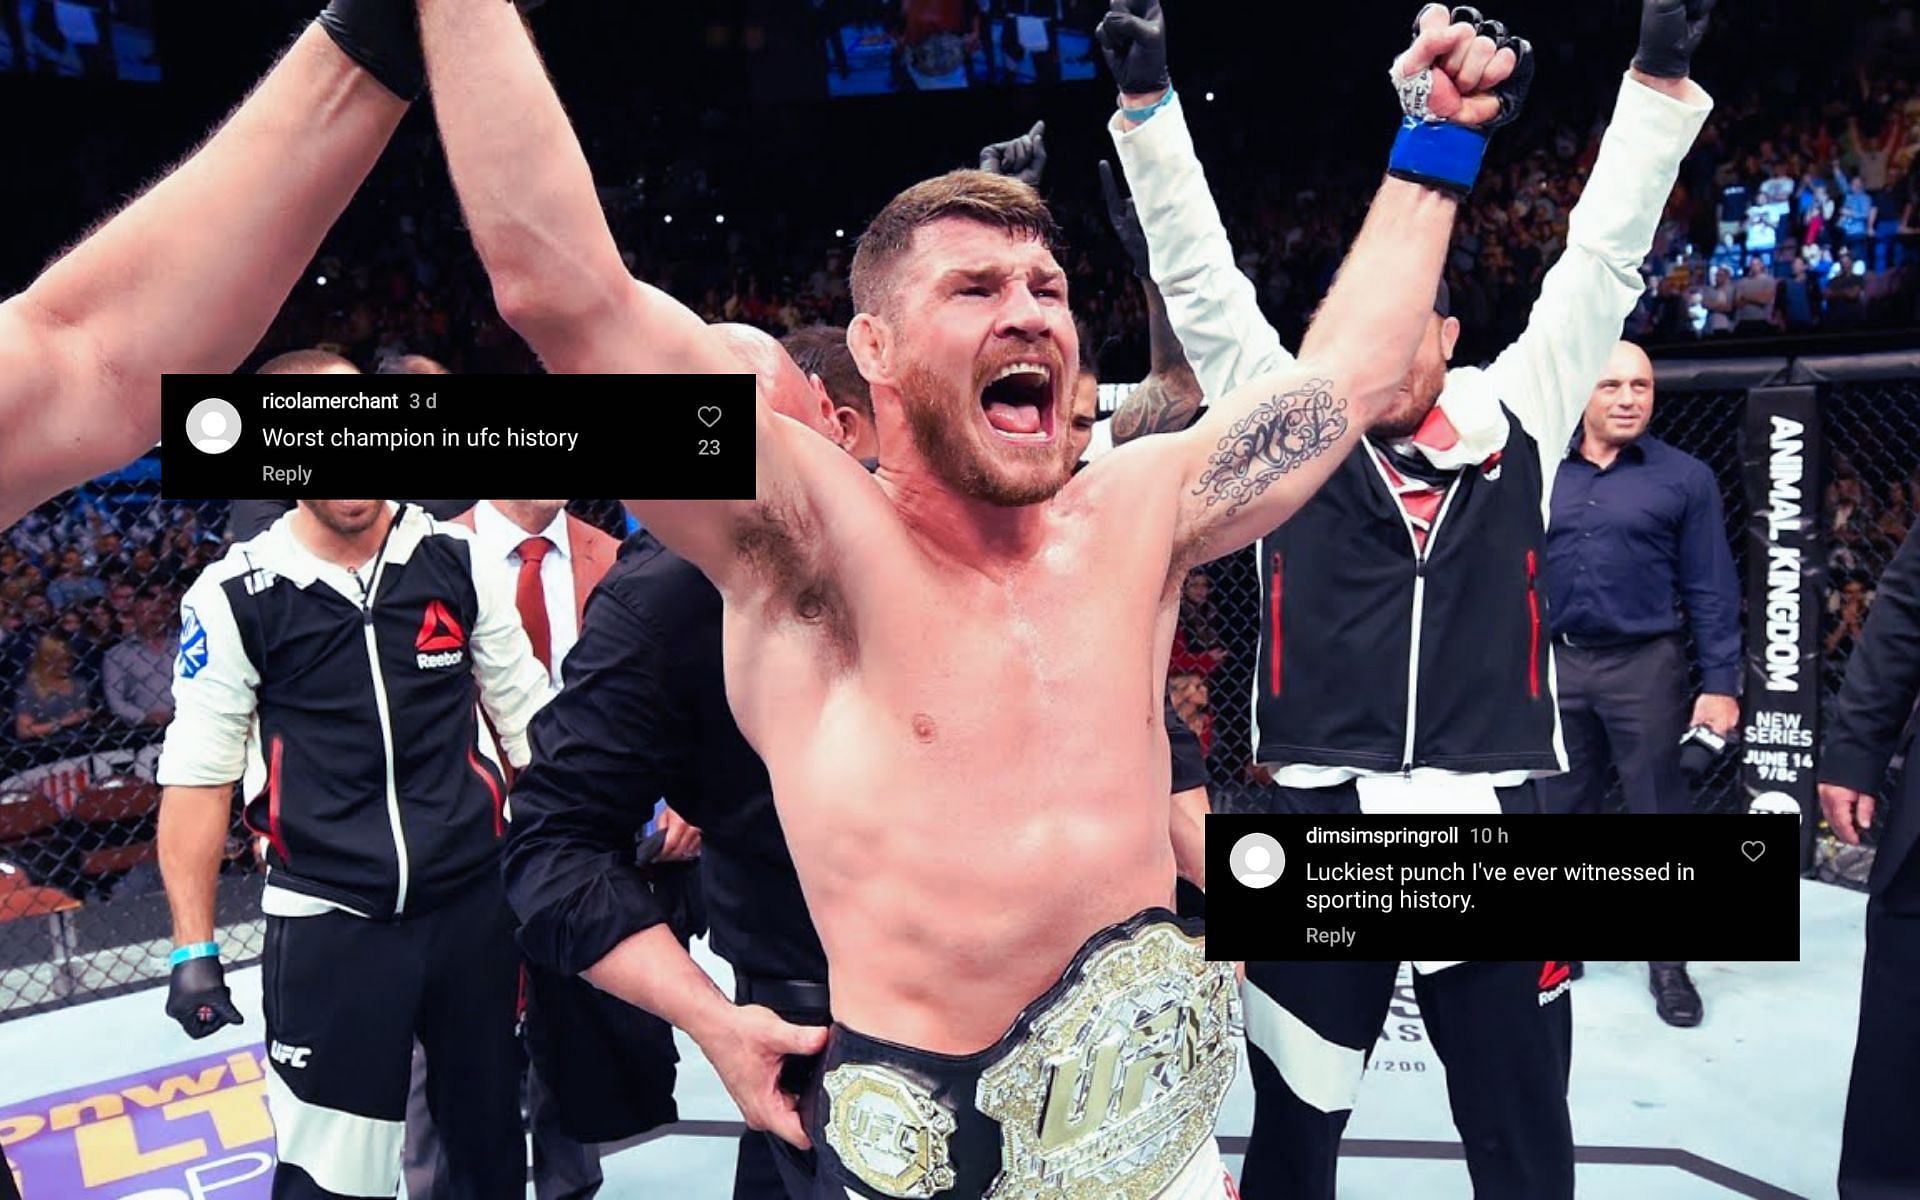 Michael Bisping (Image credit: UFC on YouTube), Comments credit: @mikebisping on Instagram